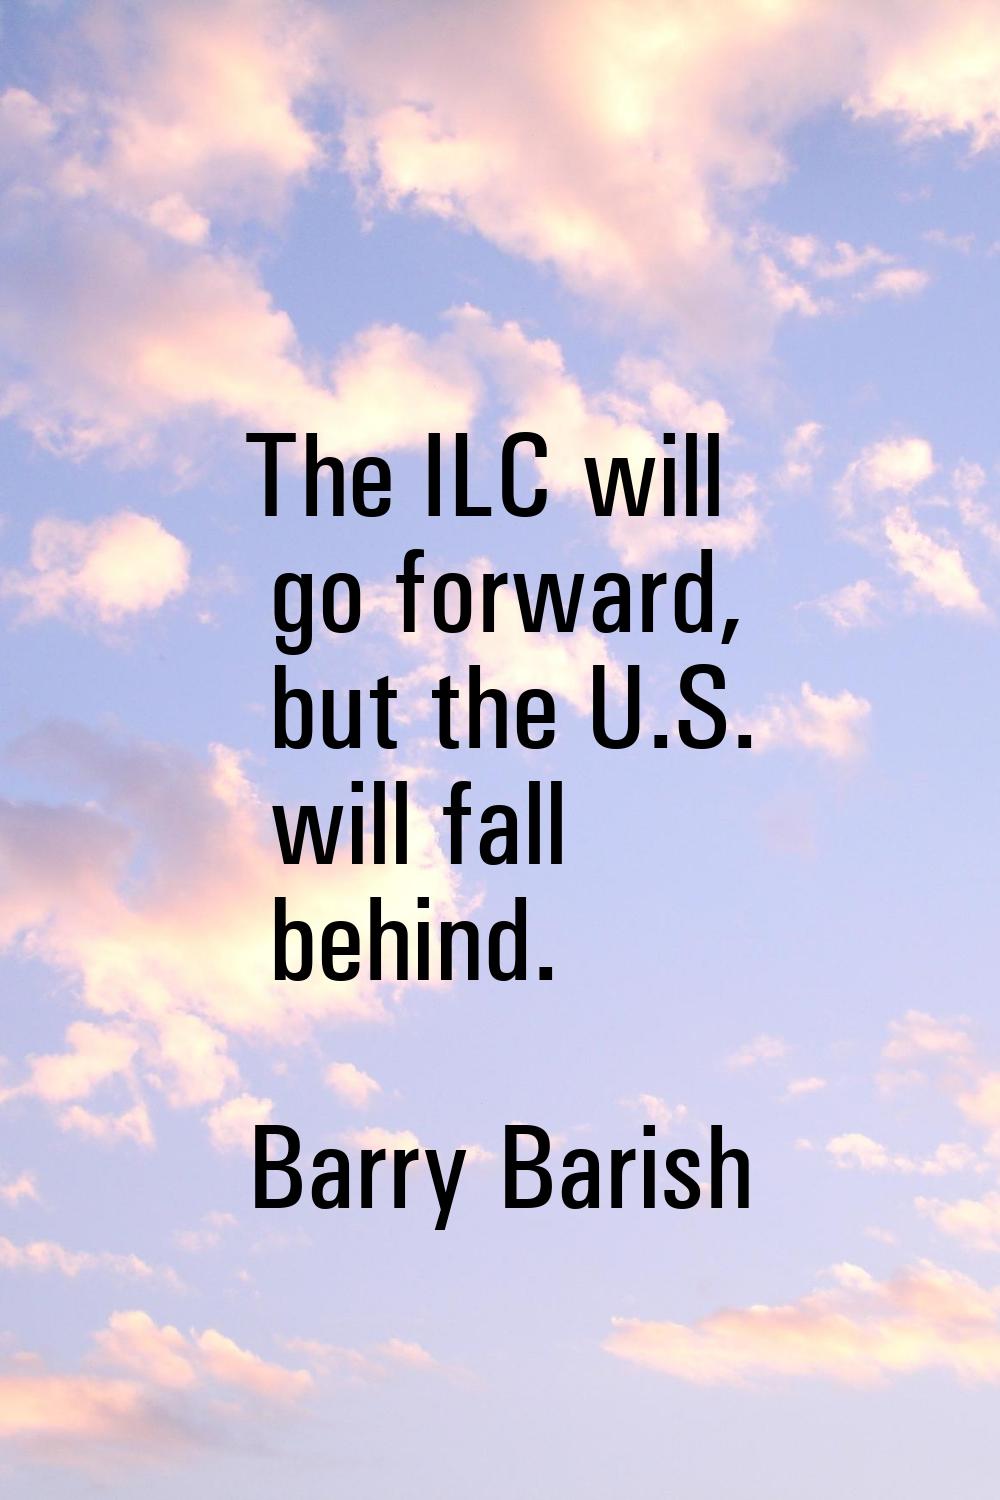 The ILC will go forward, but the U.S. will fall behind.